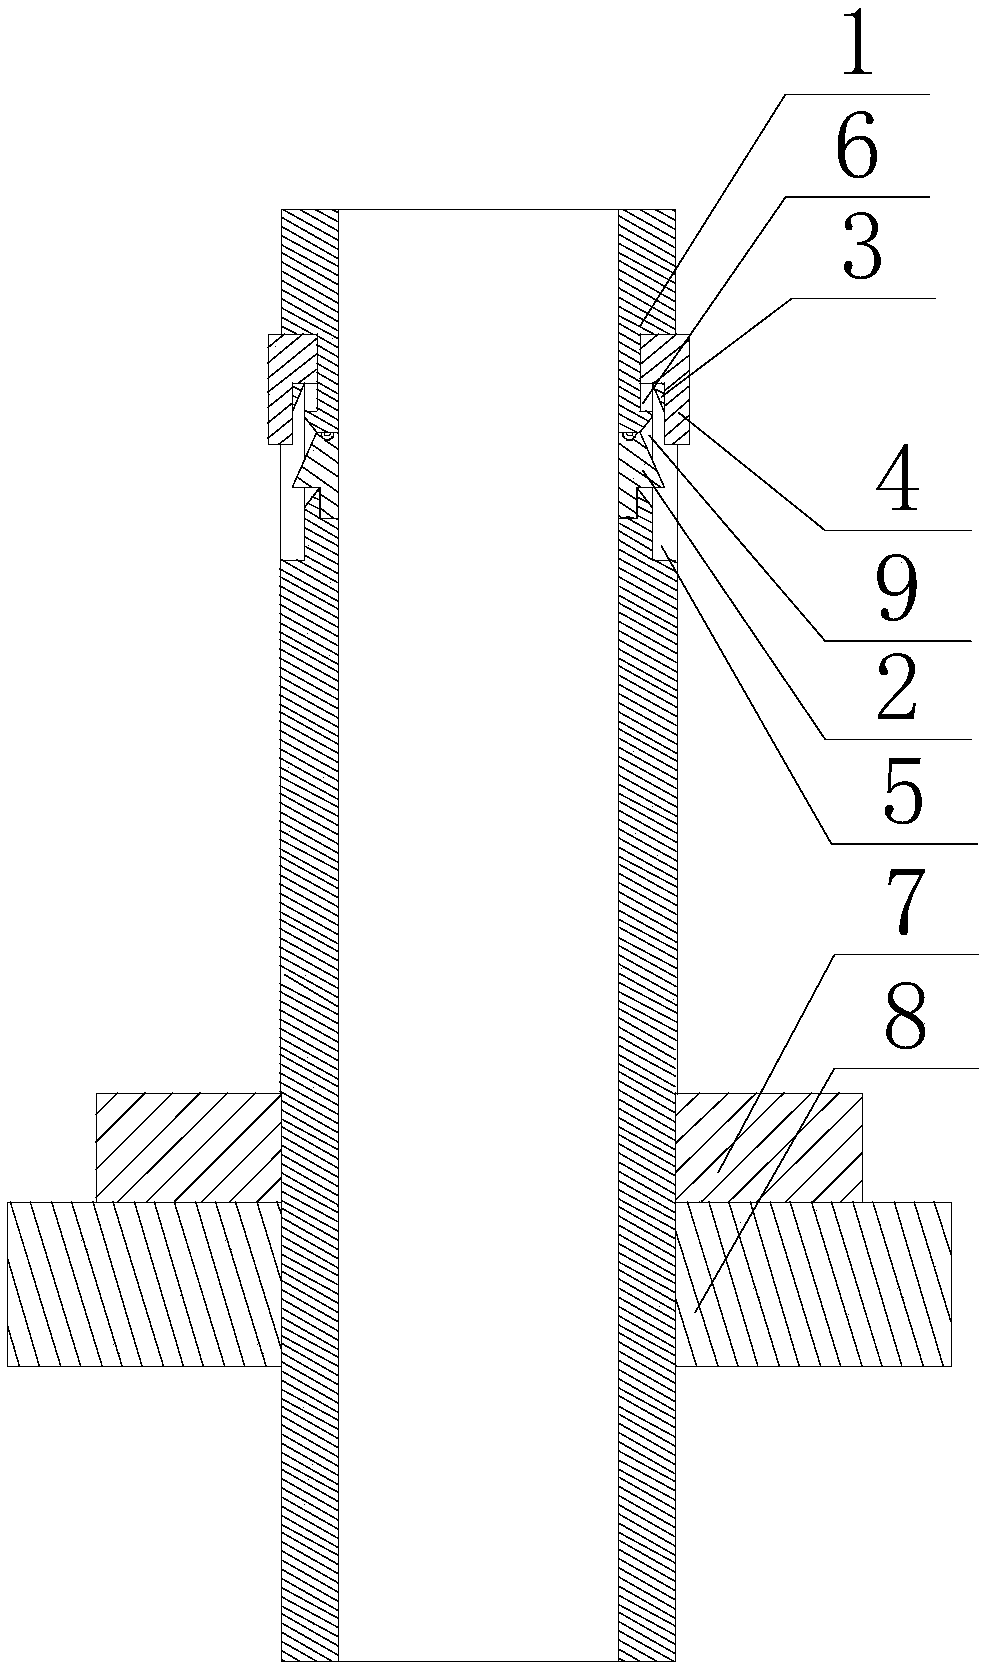 Implementation method of steel frame forming device for pile hole foundation